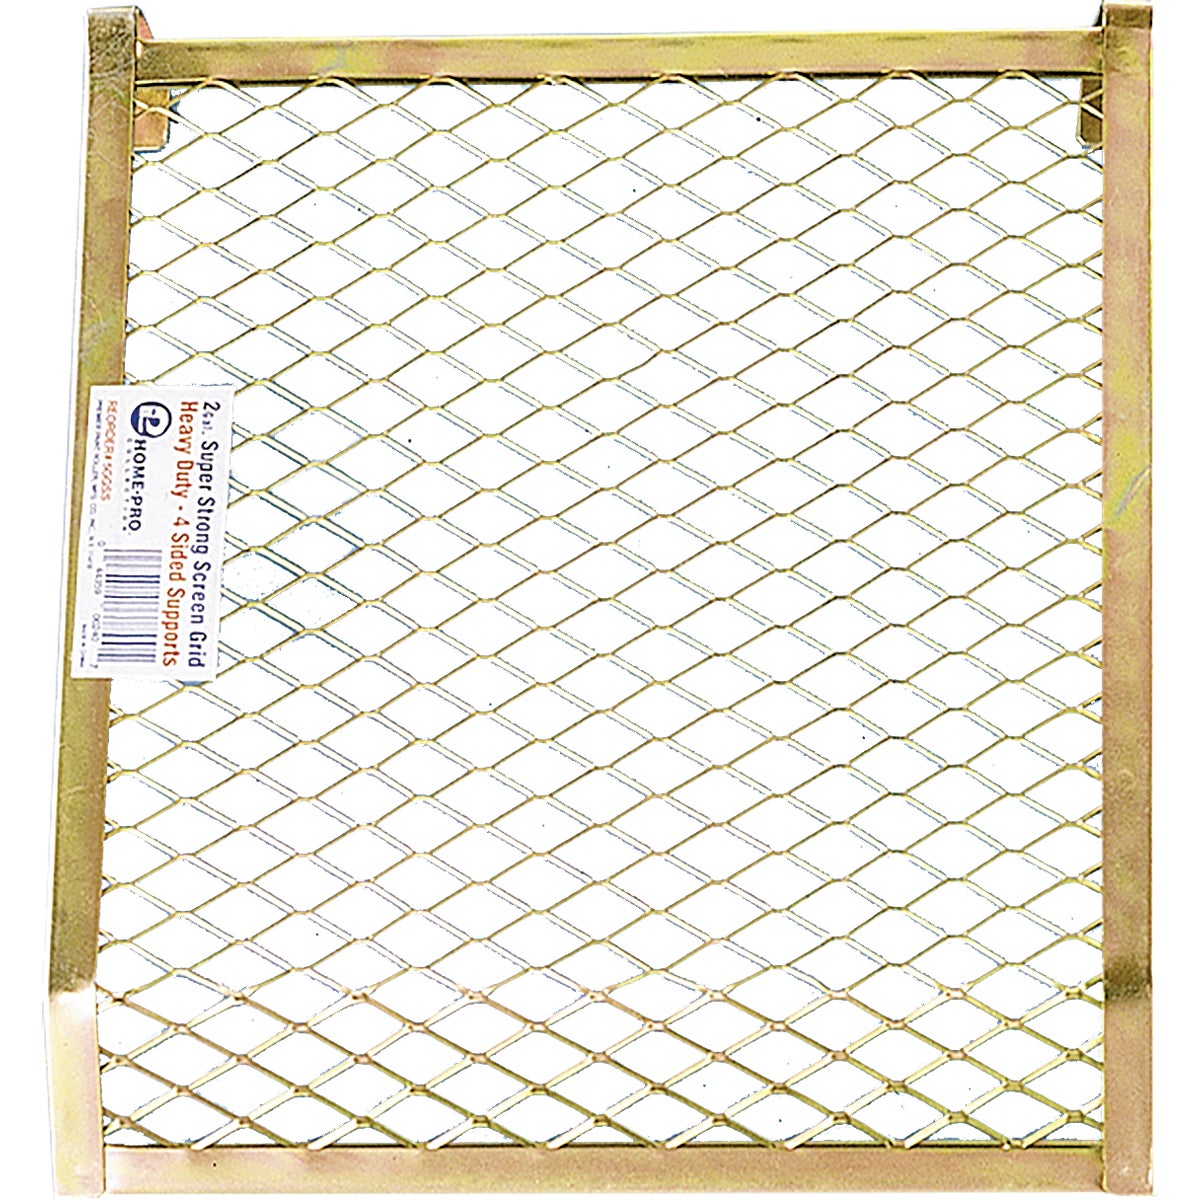 Item 780199, The sturdy rust-resistant, plated grid is pre-bent to secure the grid to 